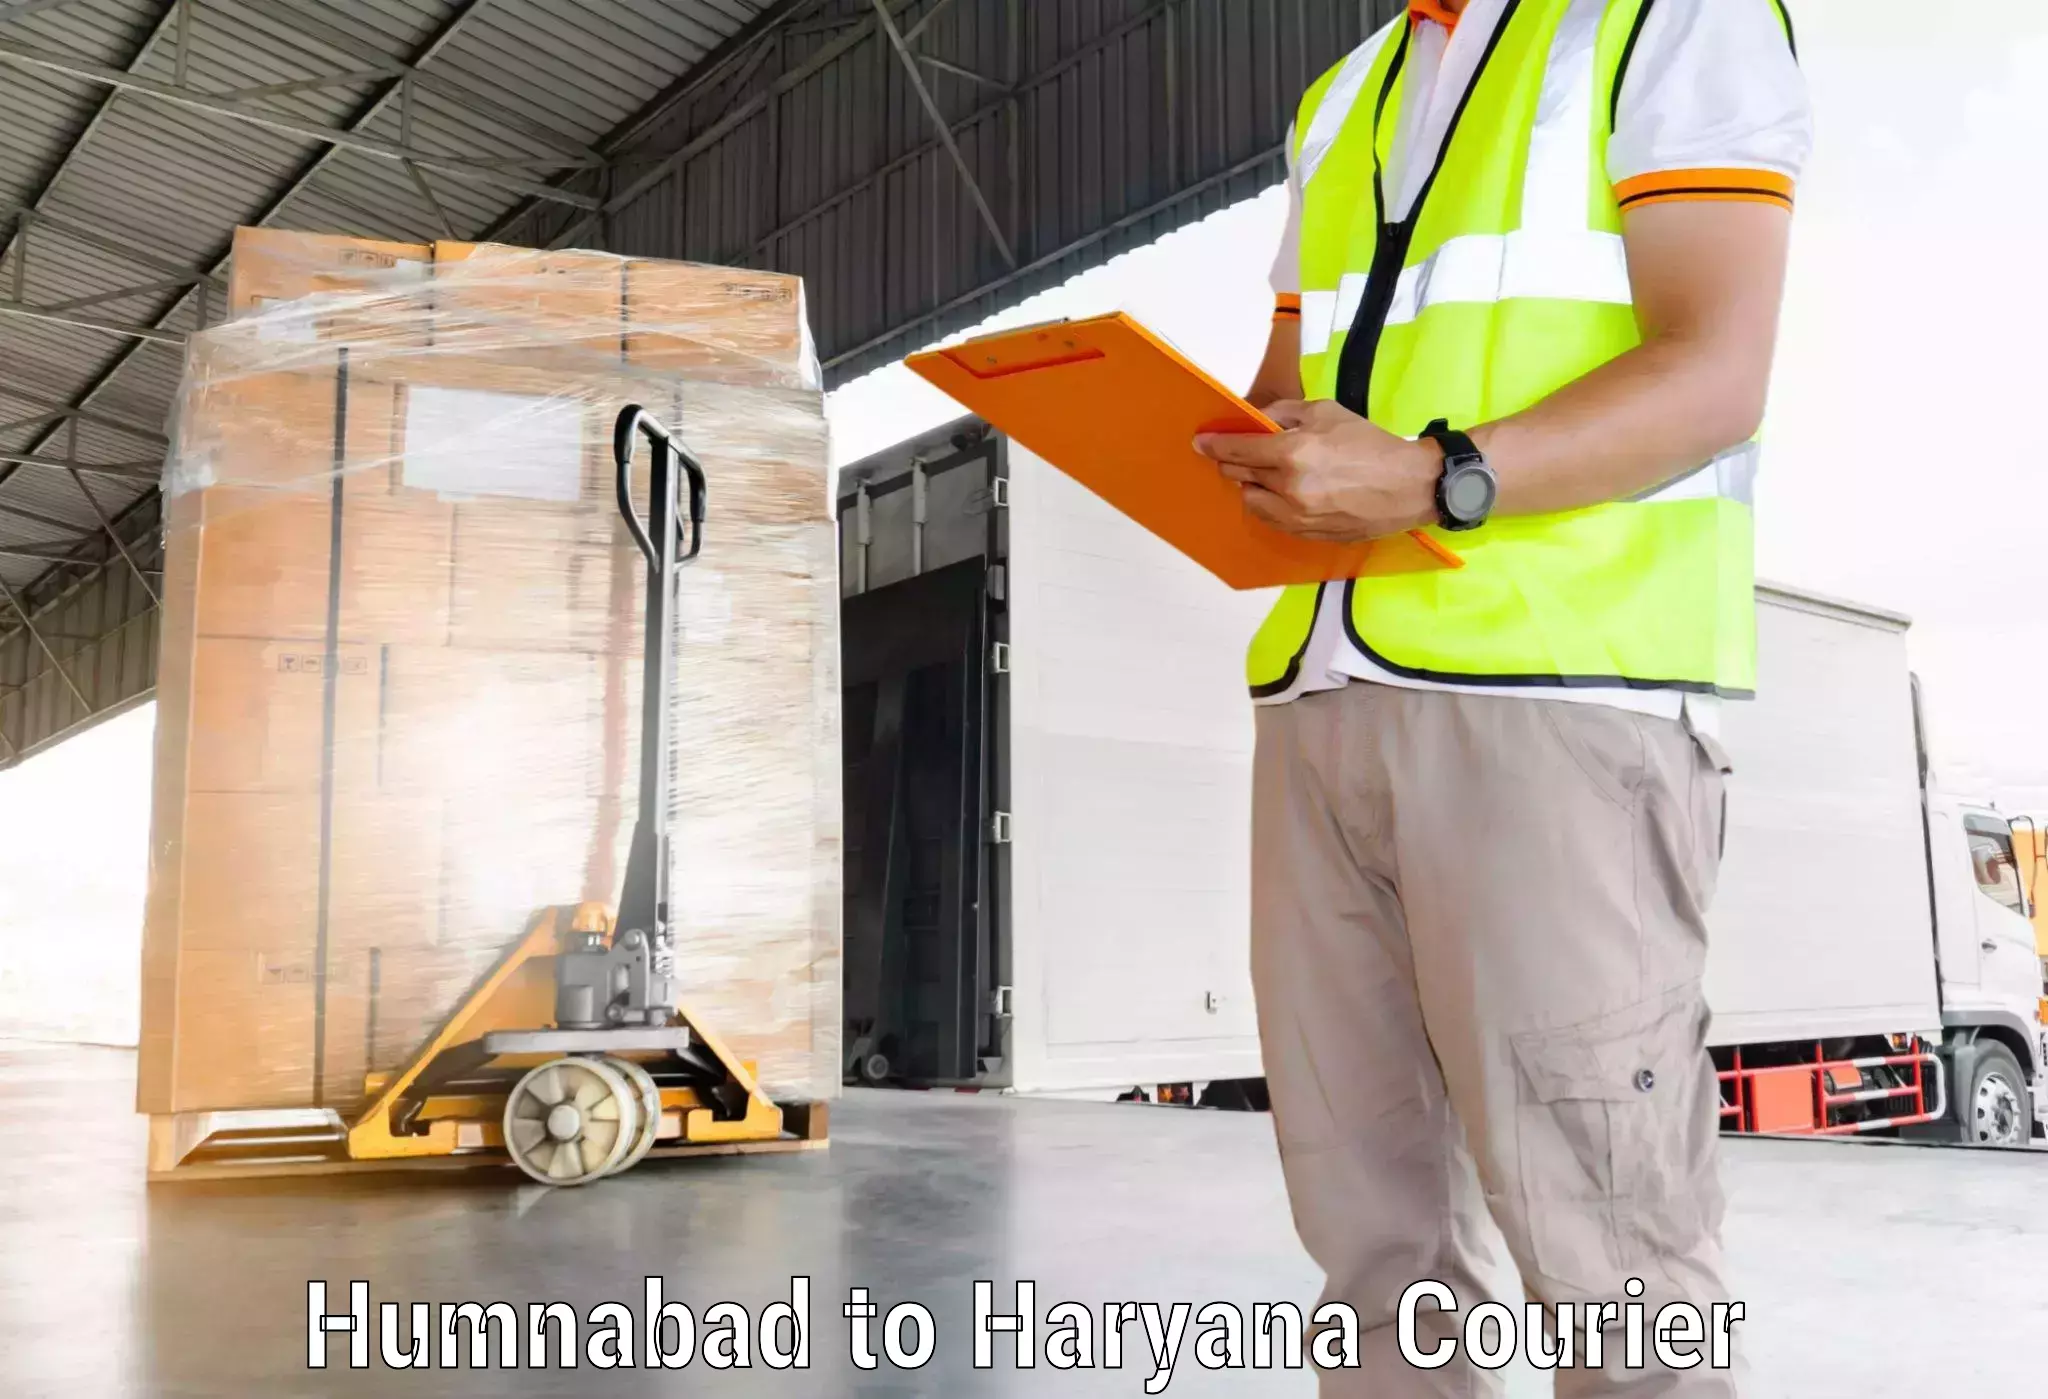 Rapid shipping services in Humnabad to Bilaspur Haryana